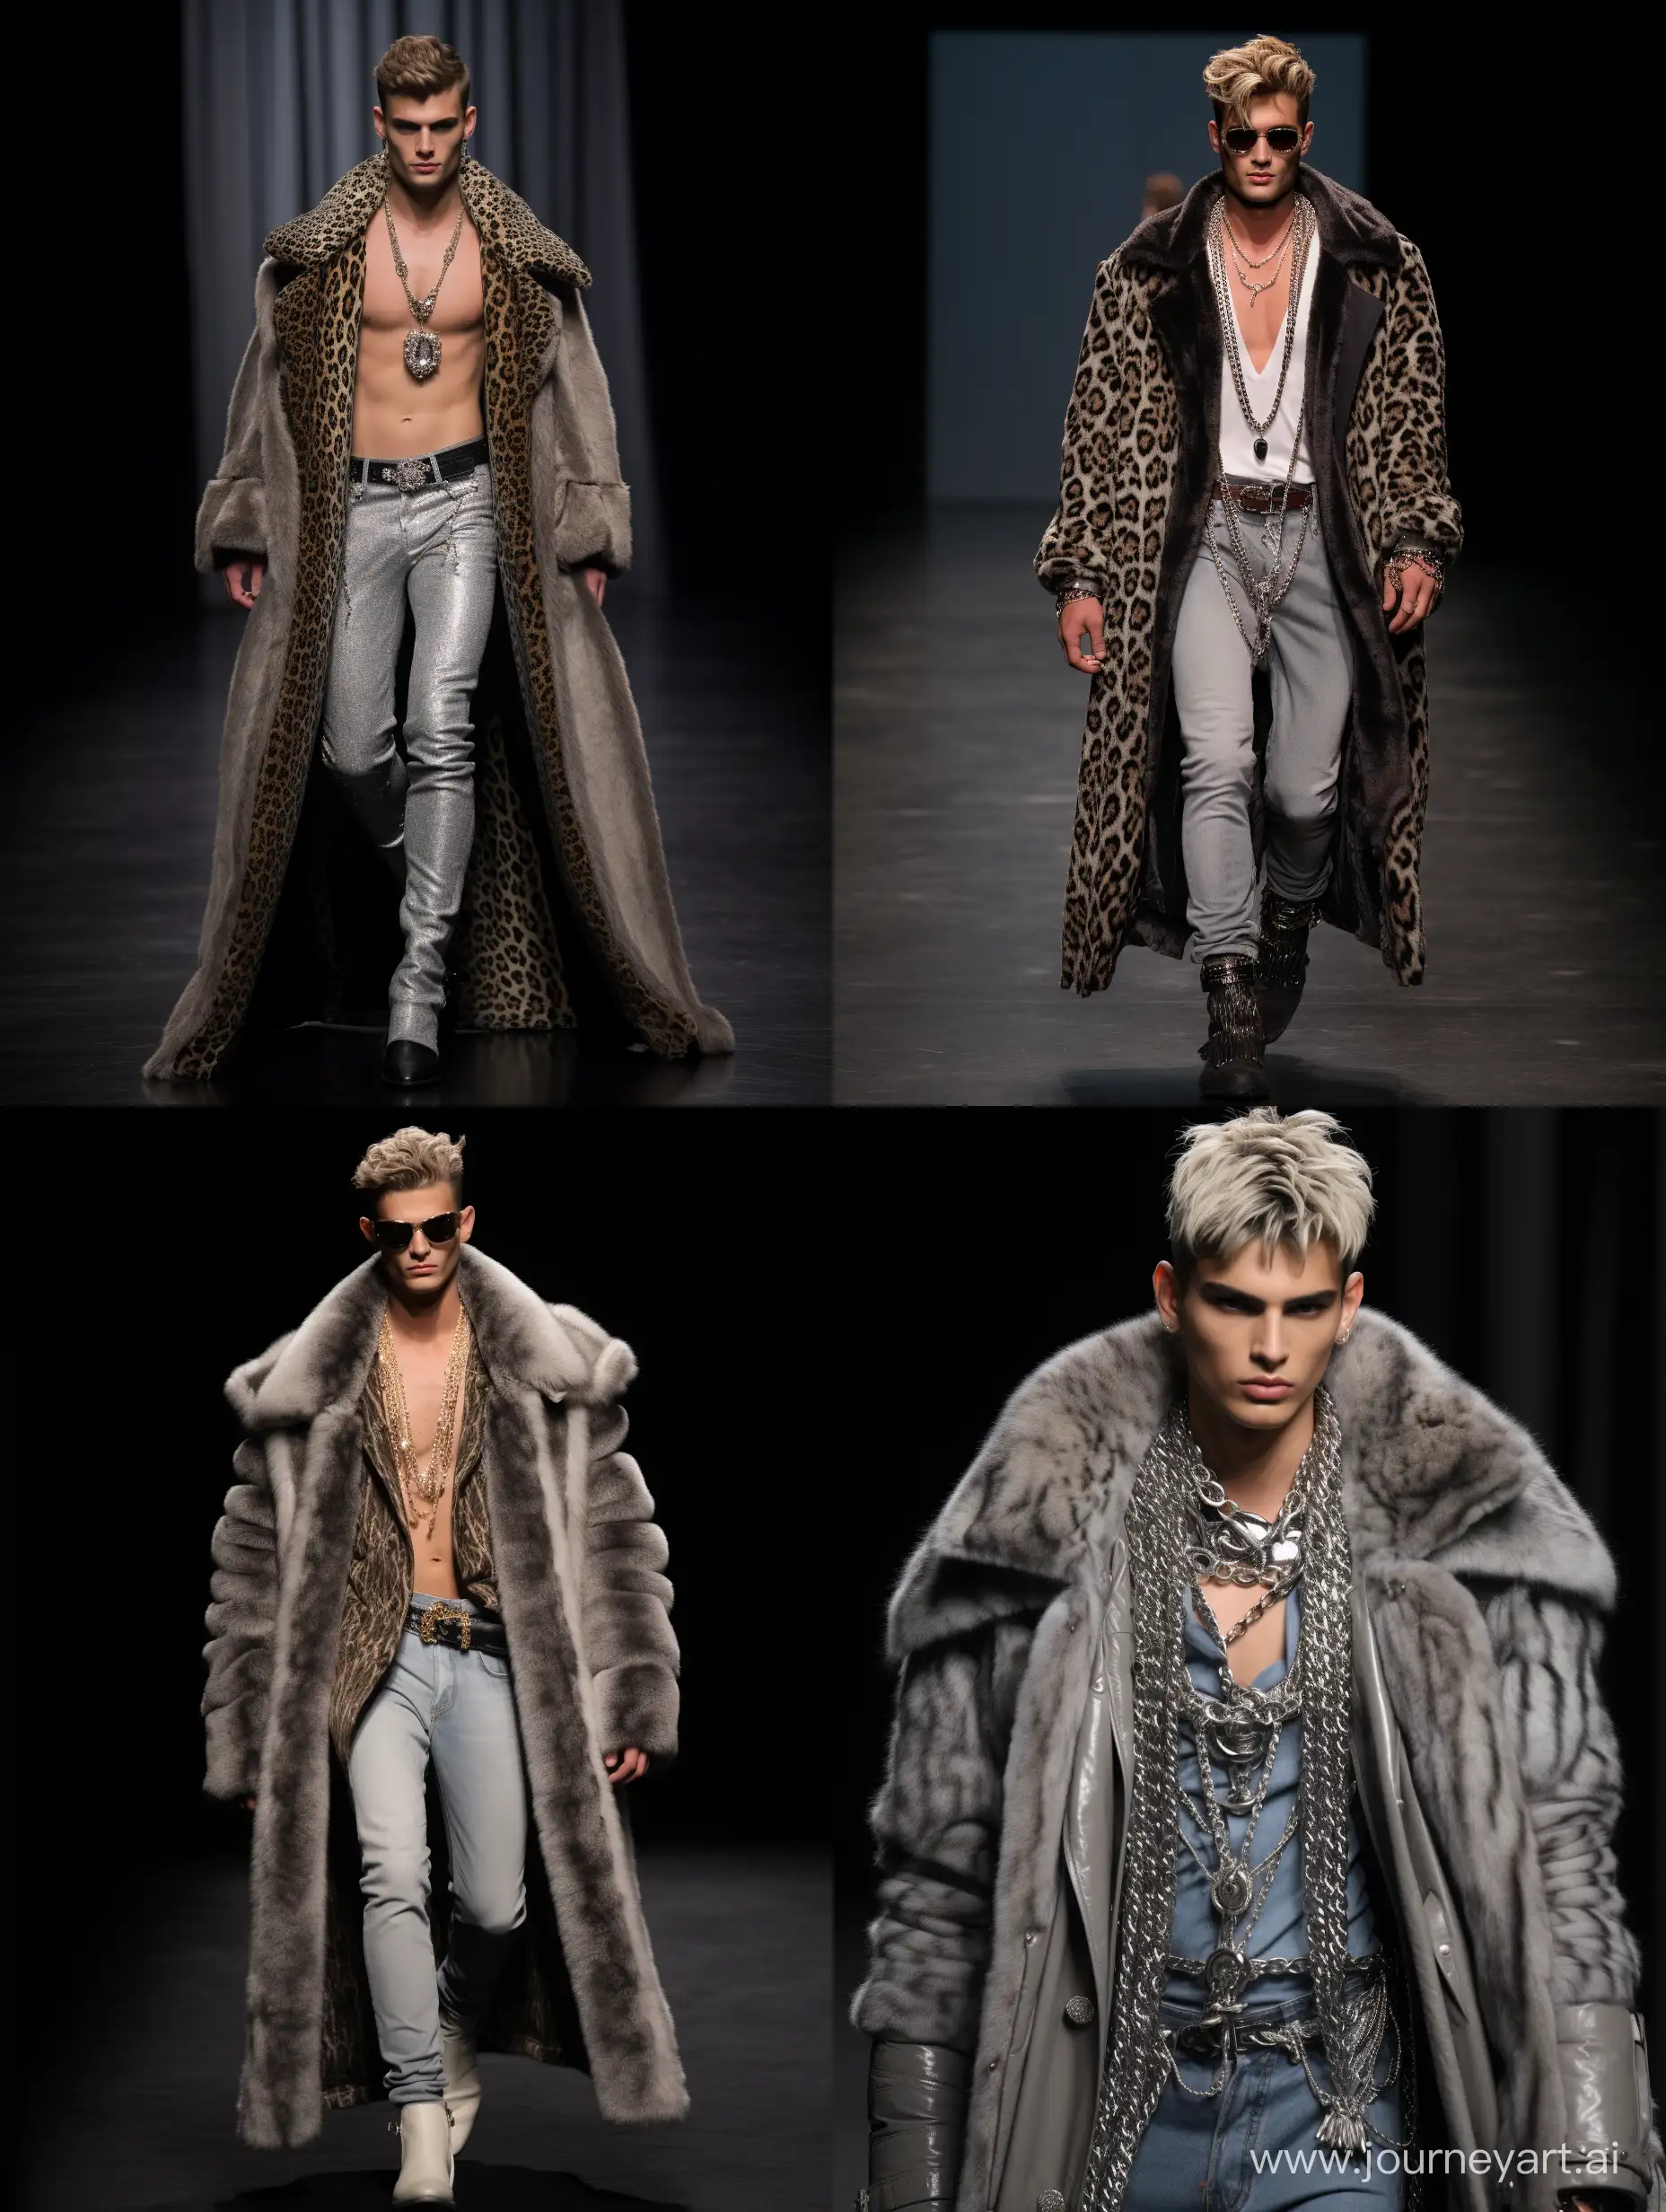 Handsome-Male-Model-in-Slim-Fit-Jeans-and-Coats-with-Vison-Mink-Jewelry